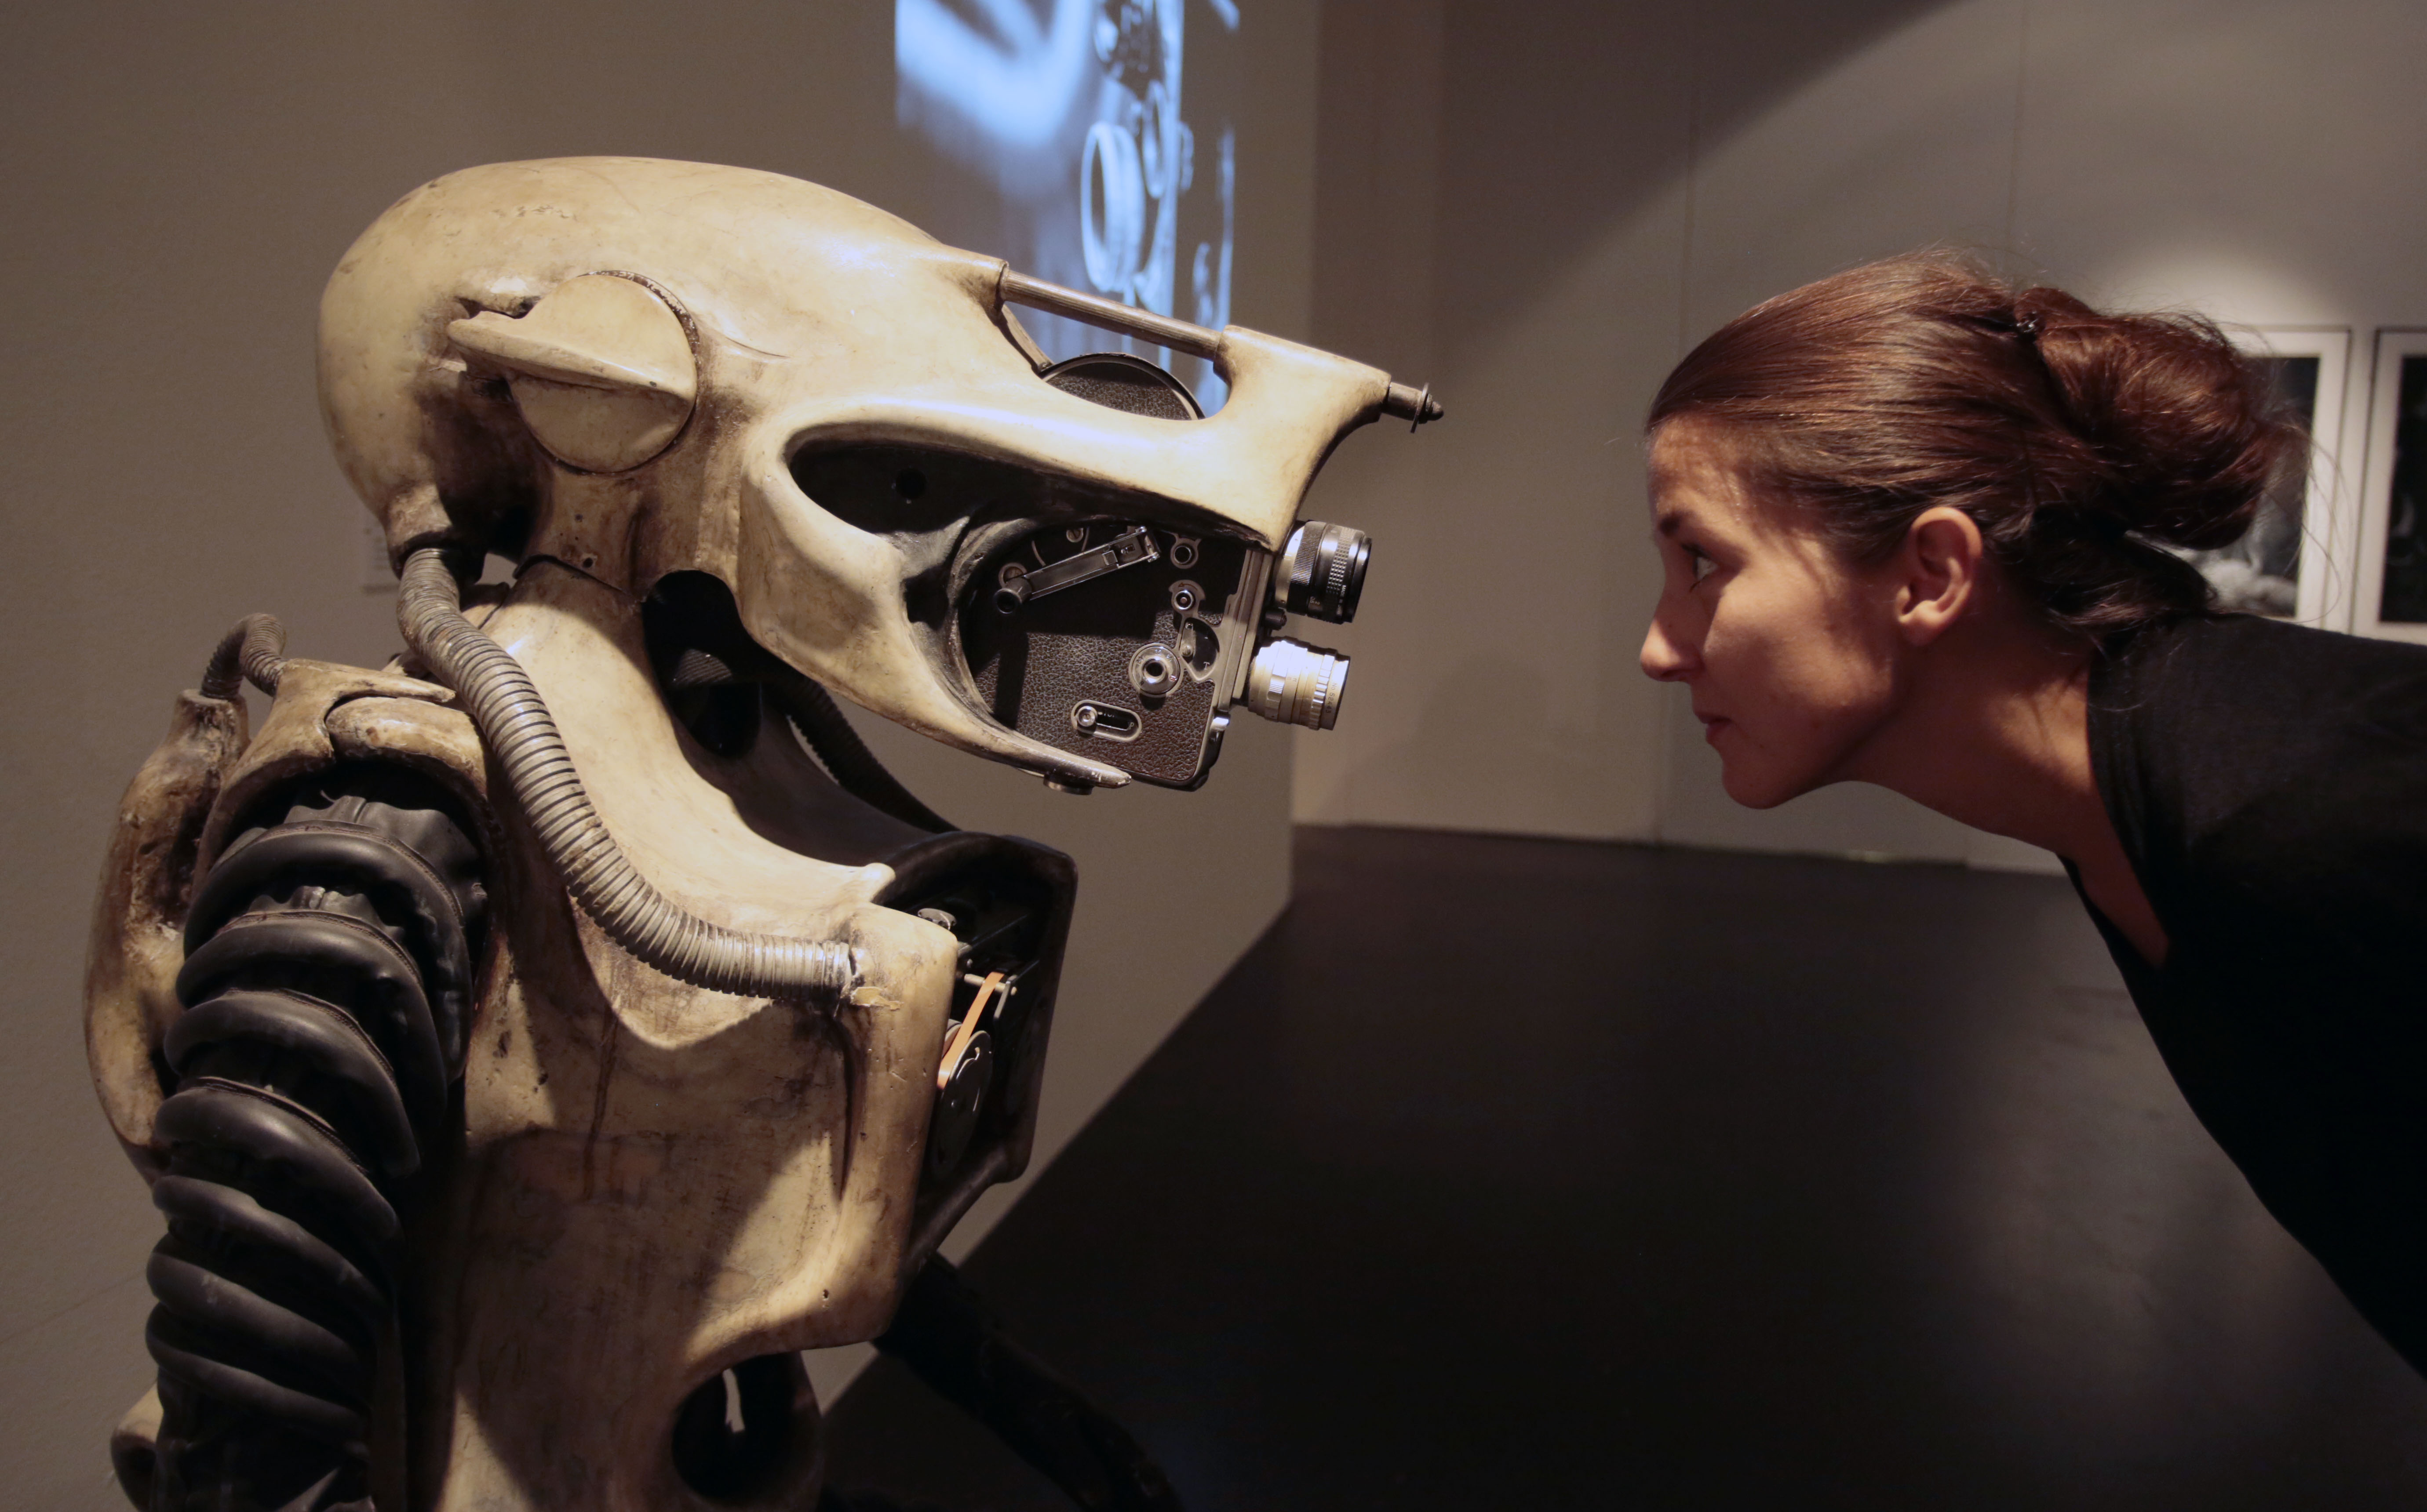 Sculptures by H.R. Giger during the opening of the Ars Electronica 2013 exhibition 'HR Giger.